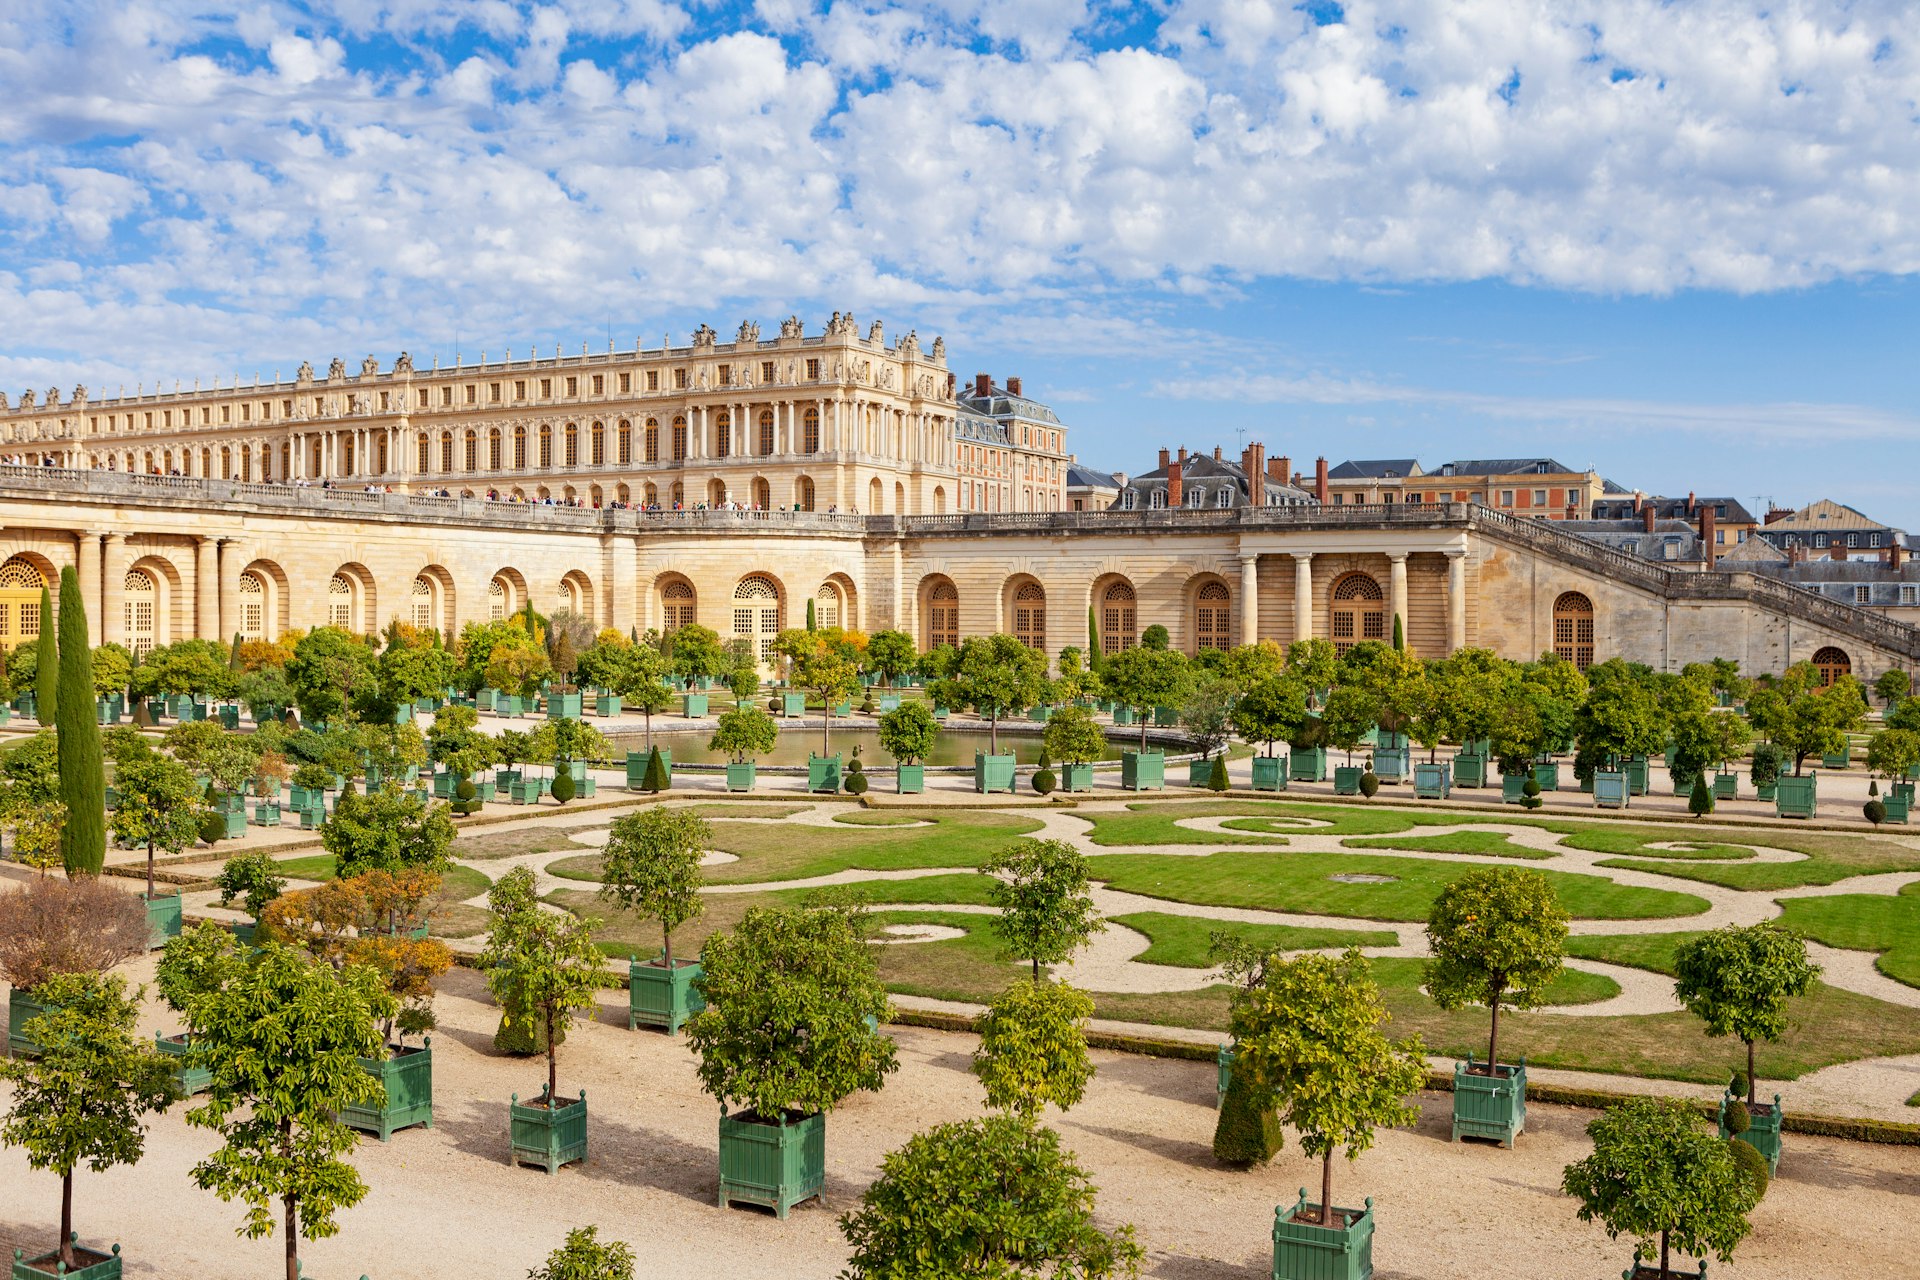 Exterior of the Palace of Versailles and the Orangerie in the gardens of Versailles